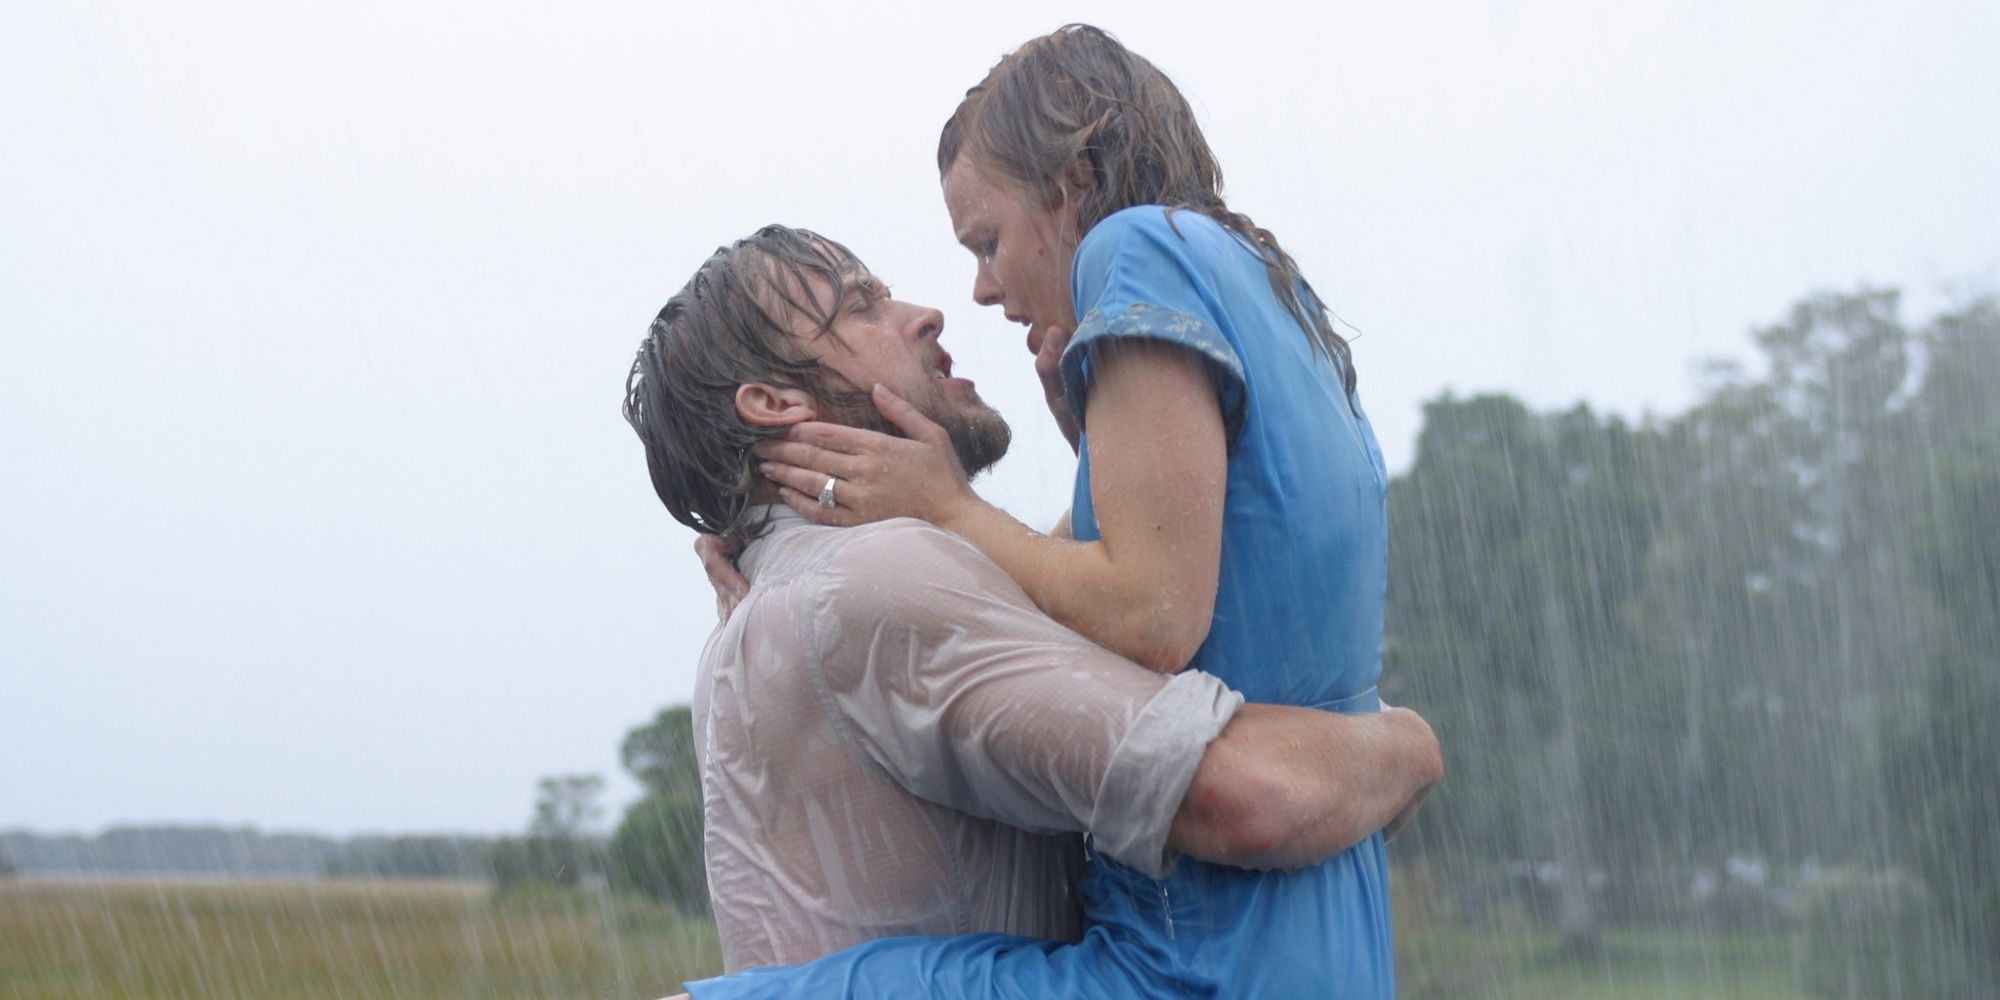 Ryan Gosling and Rachel McAdams embracing in the rain in The Notebook